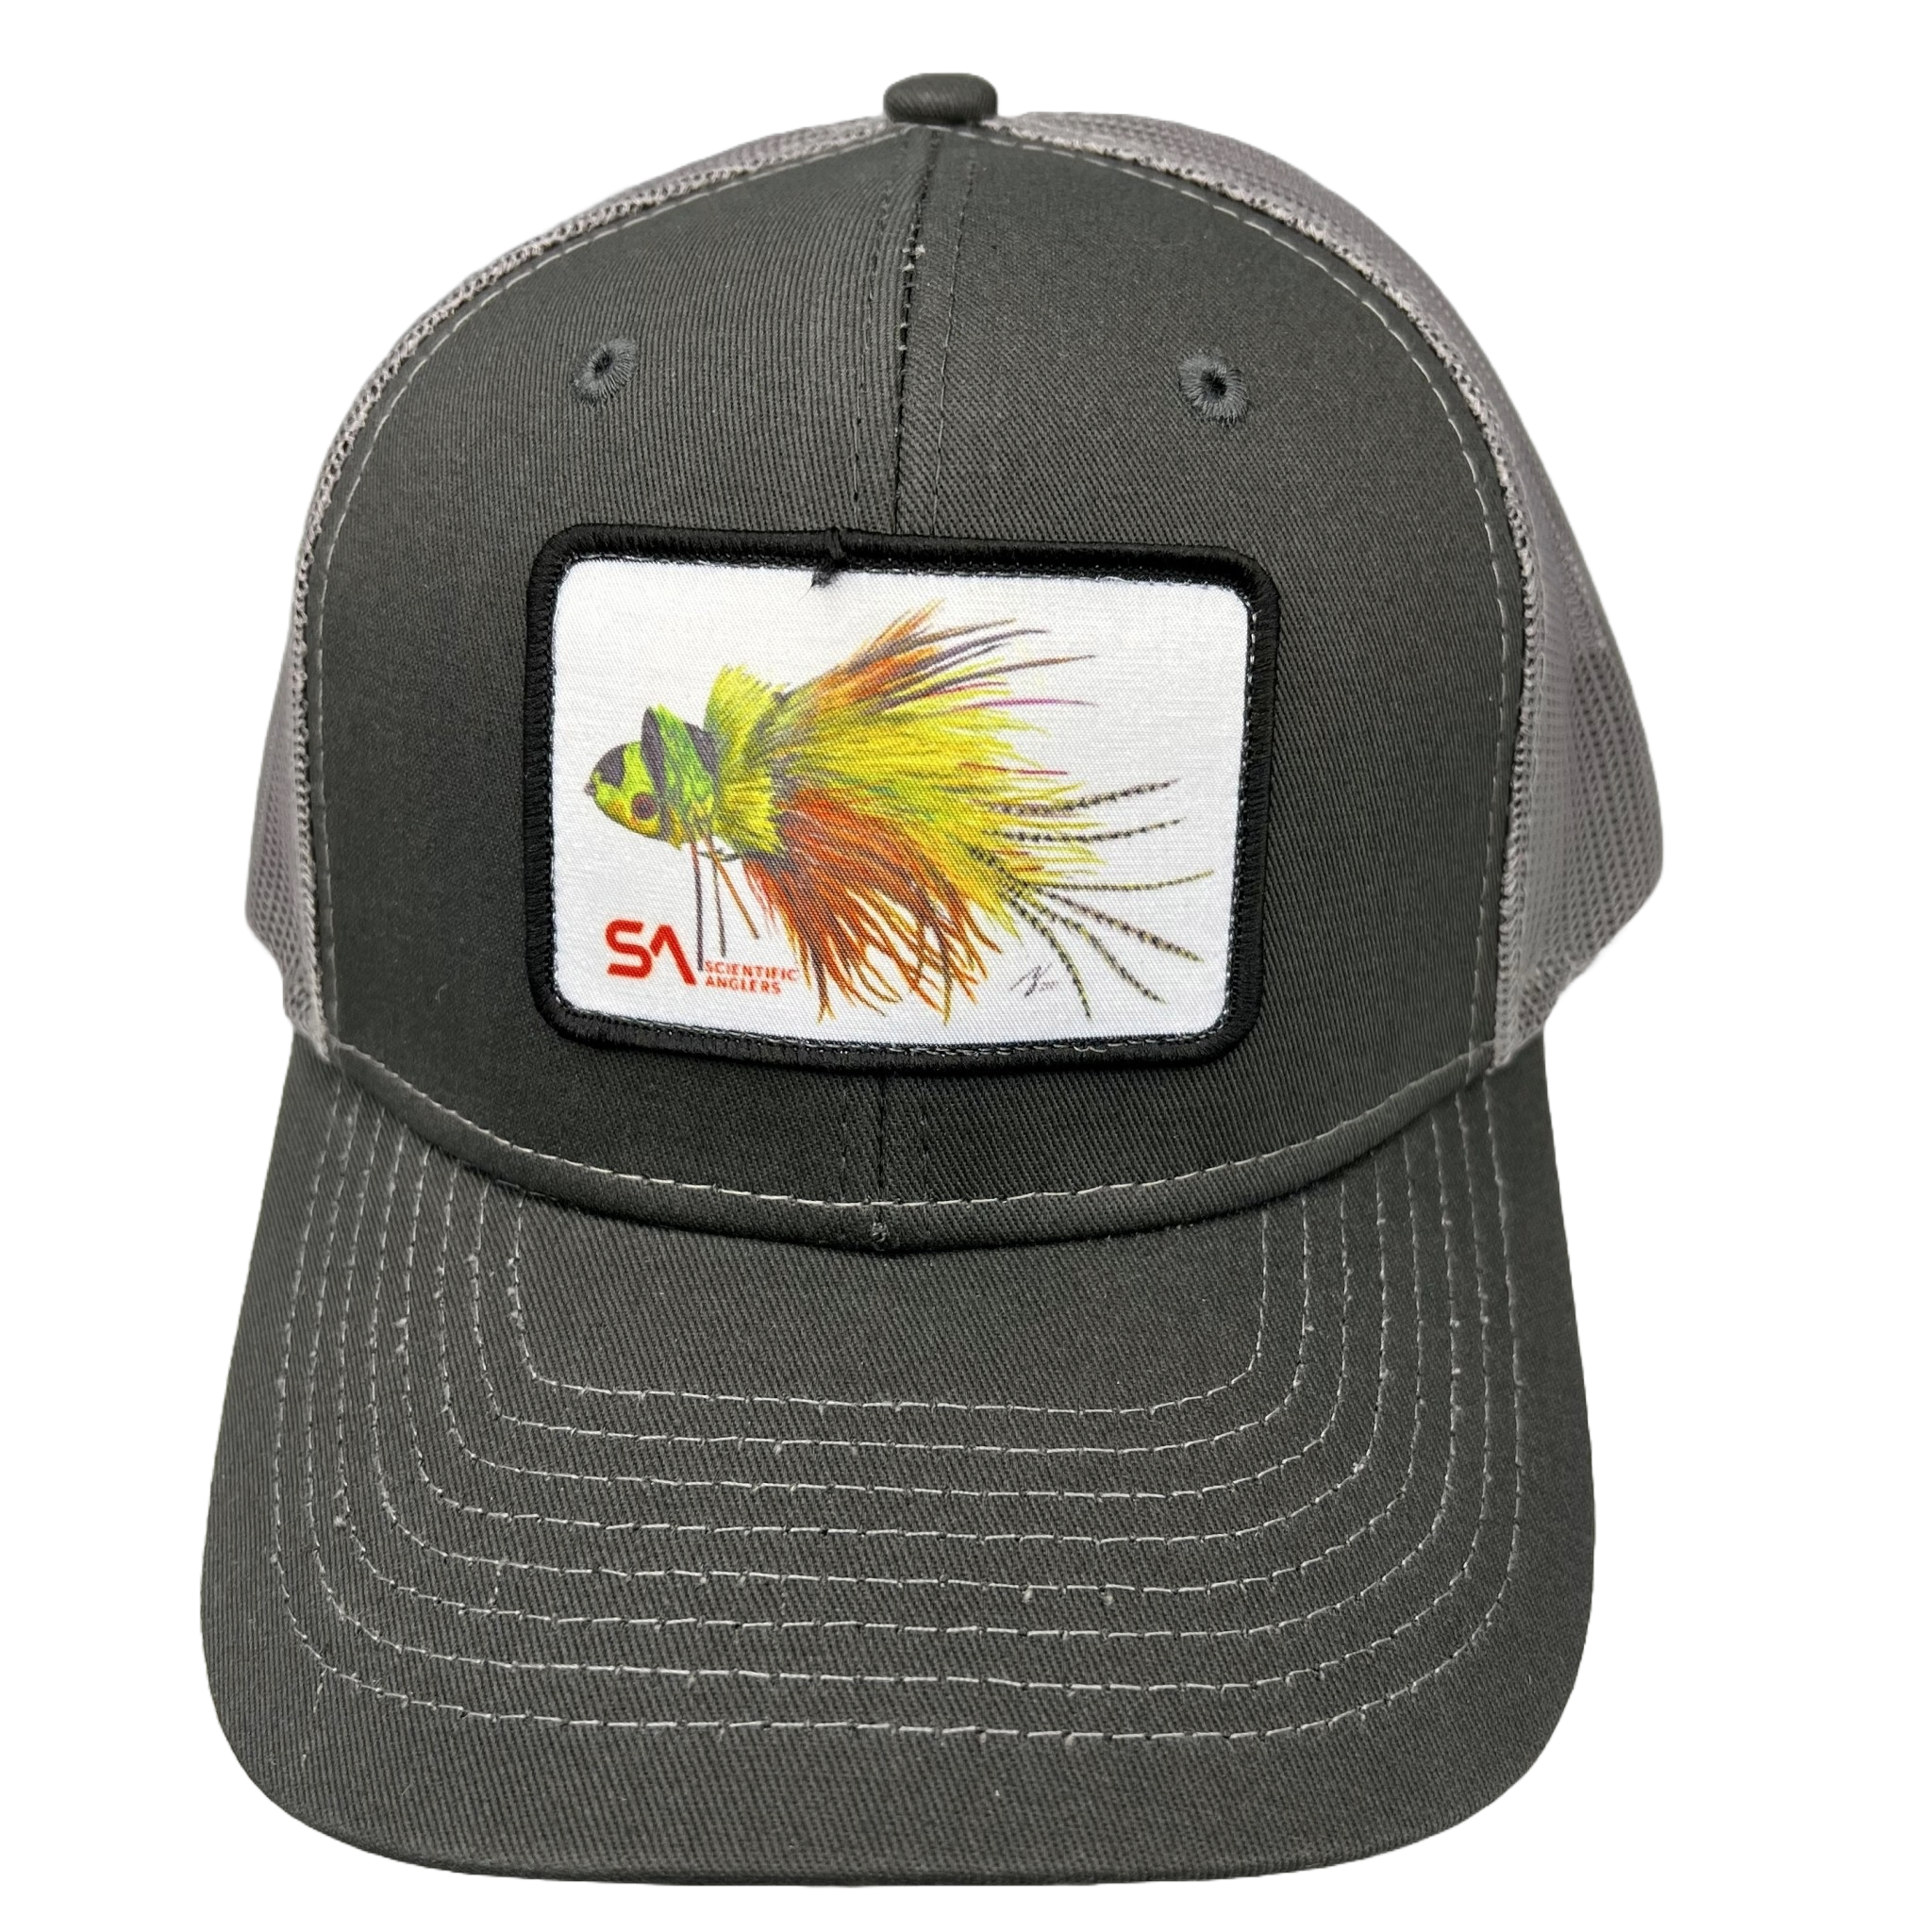 S.A. - Hallock Diver - Drift Outfitters & Fly Shop Online Store